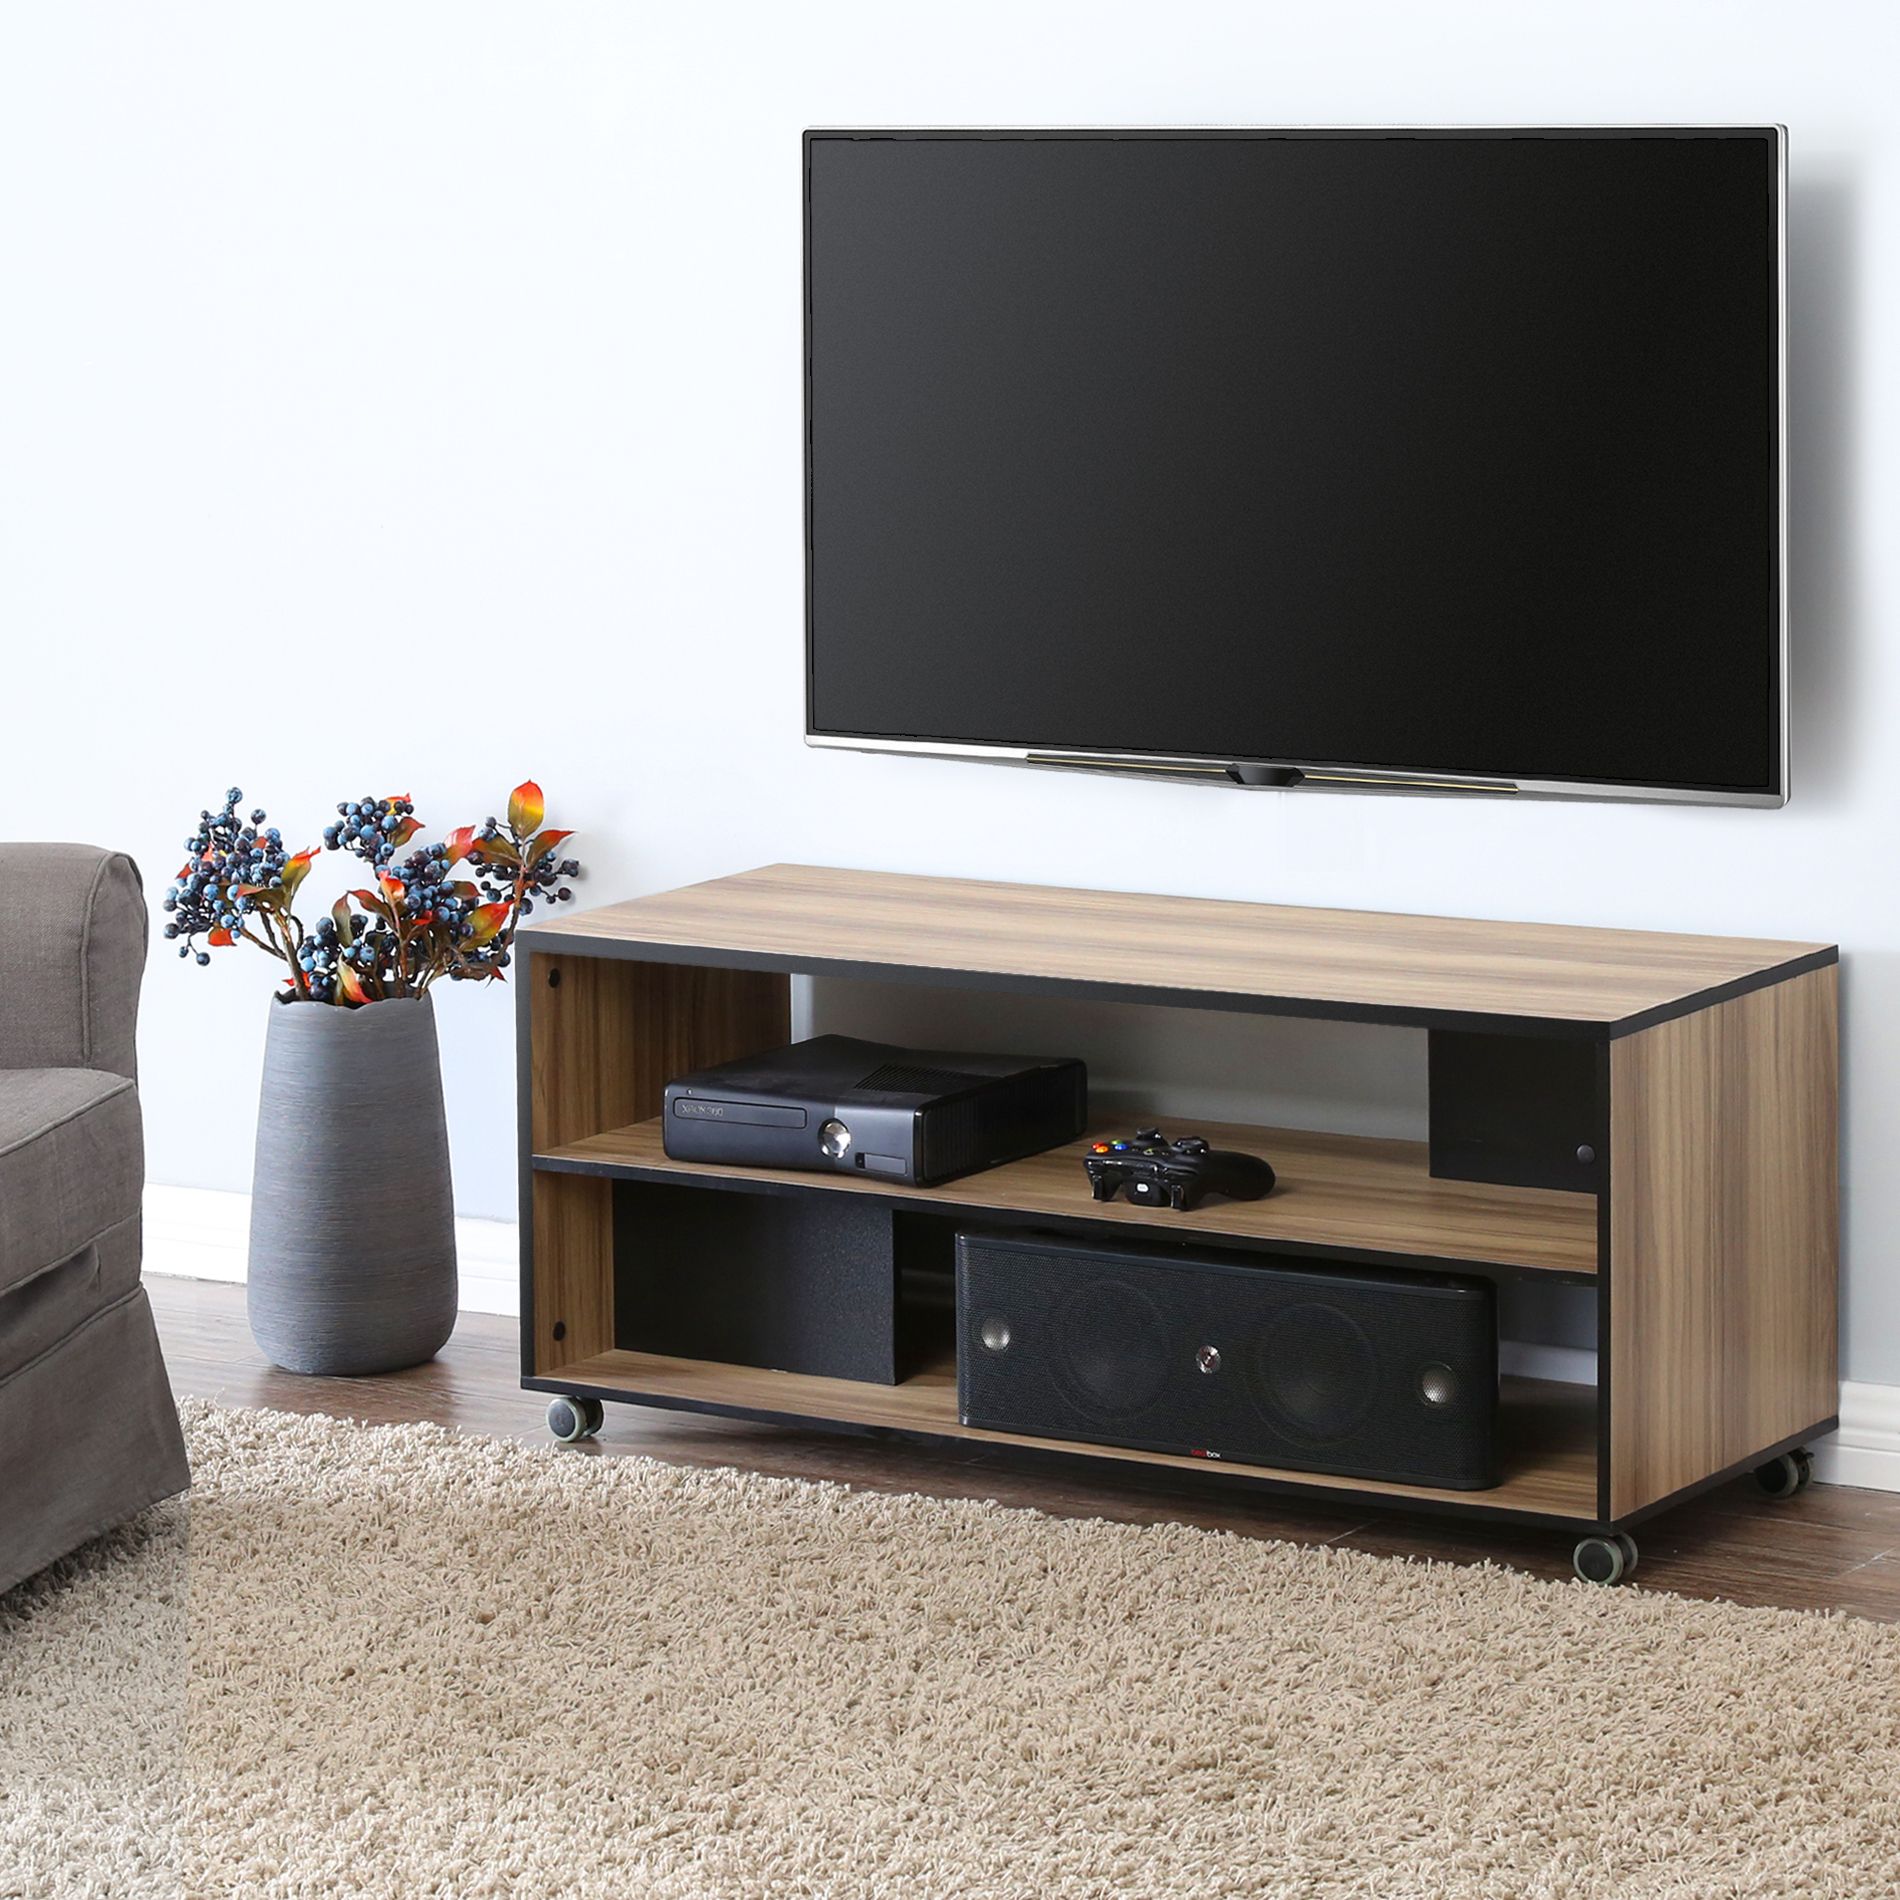 Fitueyes Wood Tv Stand Storage Console With Wheels For 23 Pertaining To Wooden Tv Stands (Photo 13 of 15)